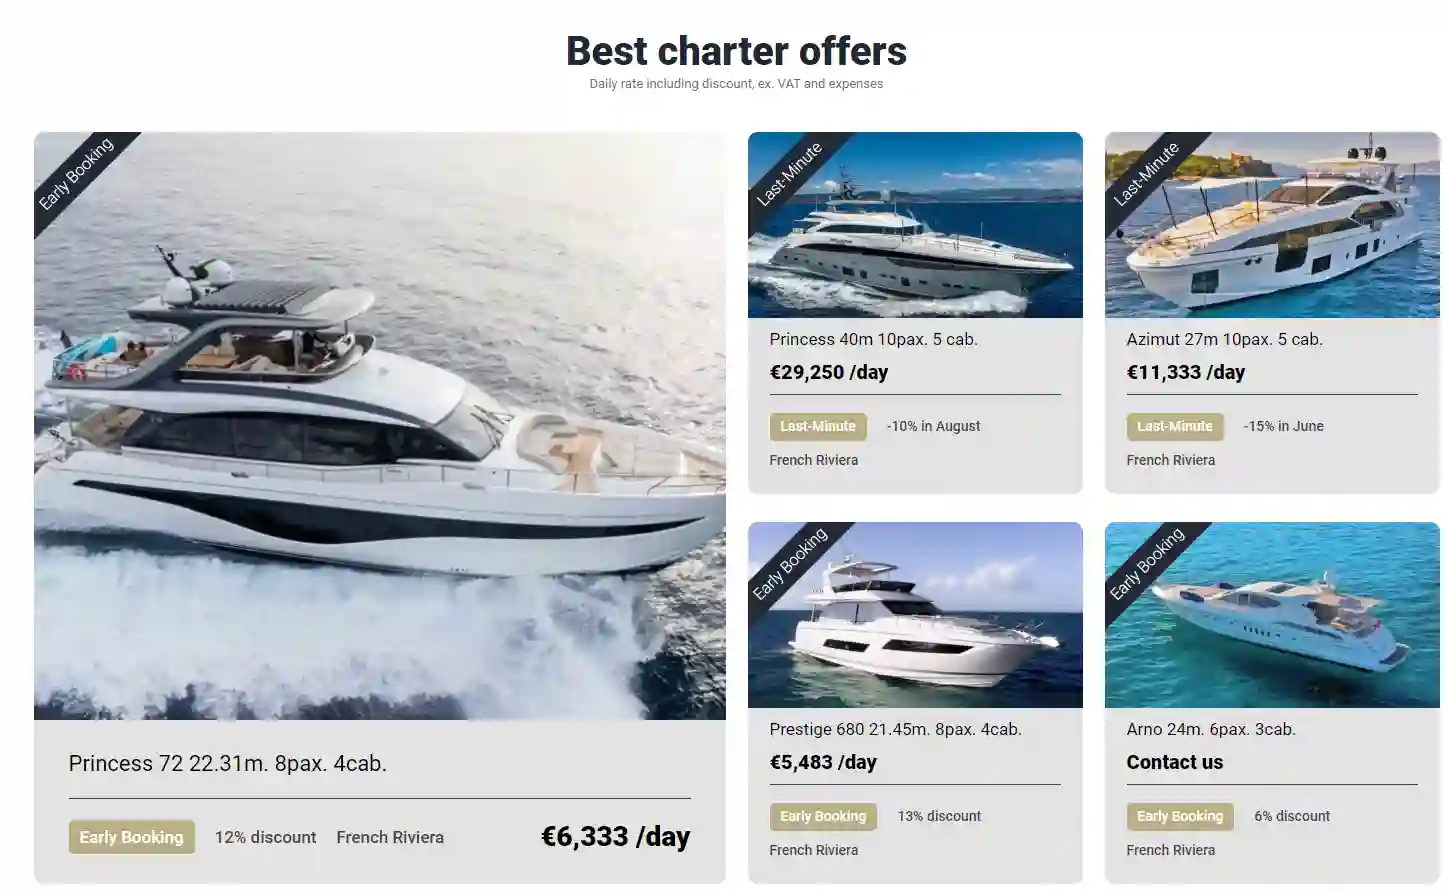 Find special offers and charter deal on Charter-deal.com